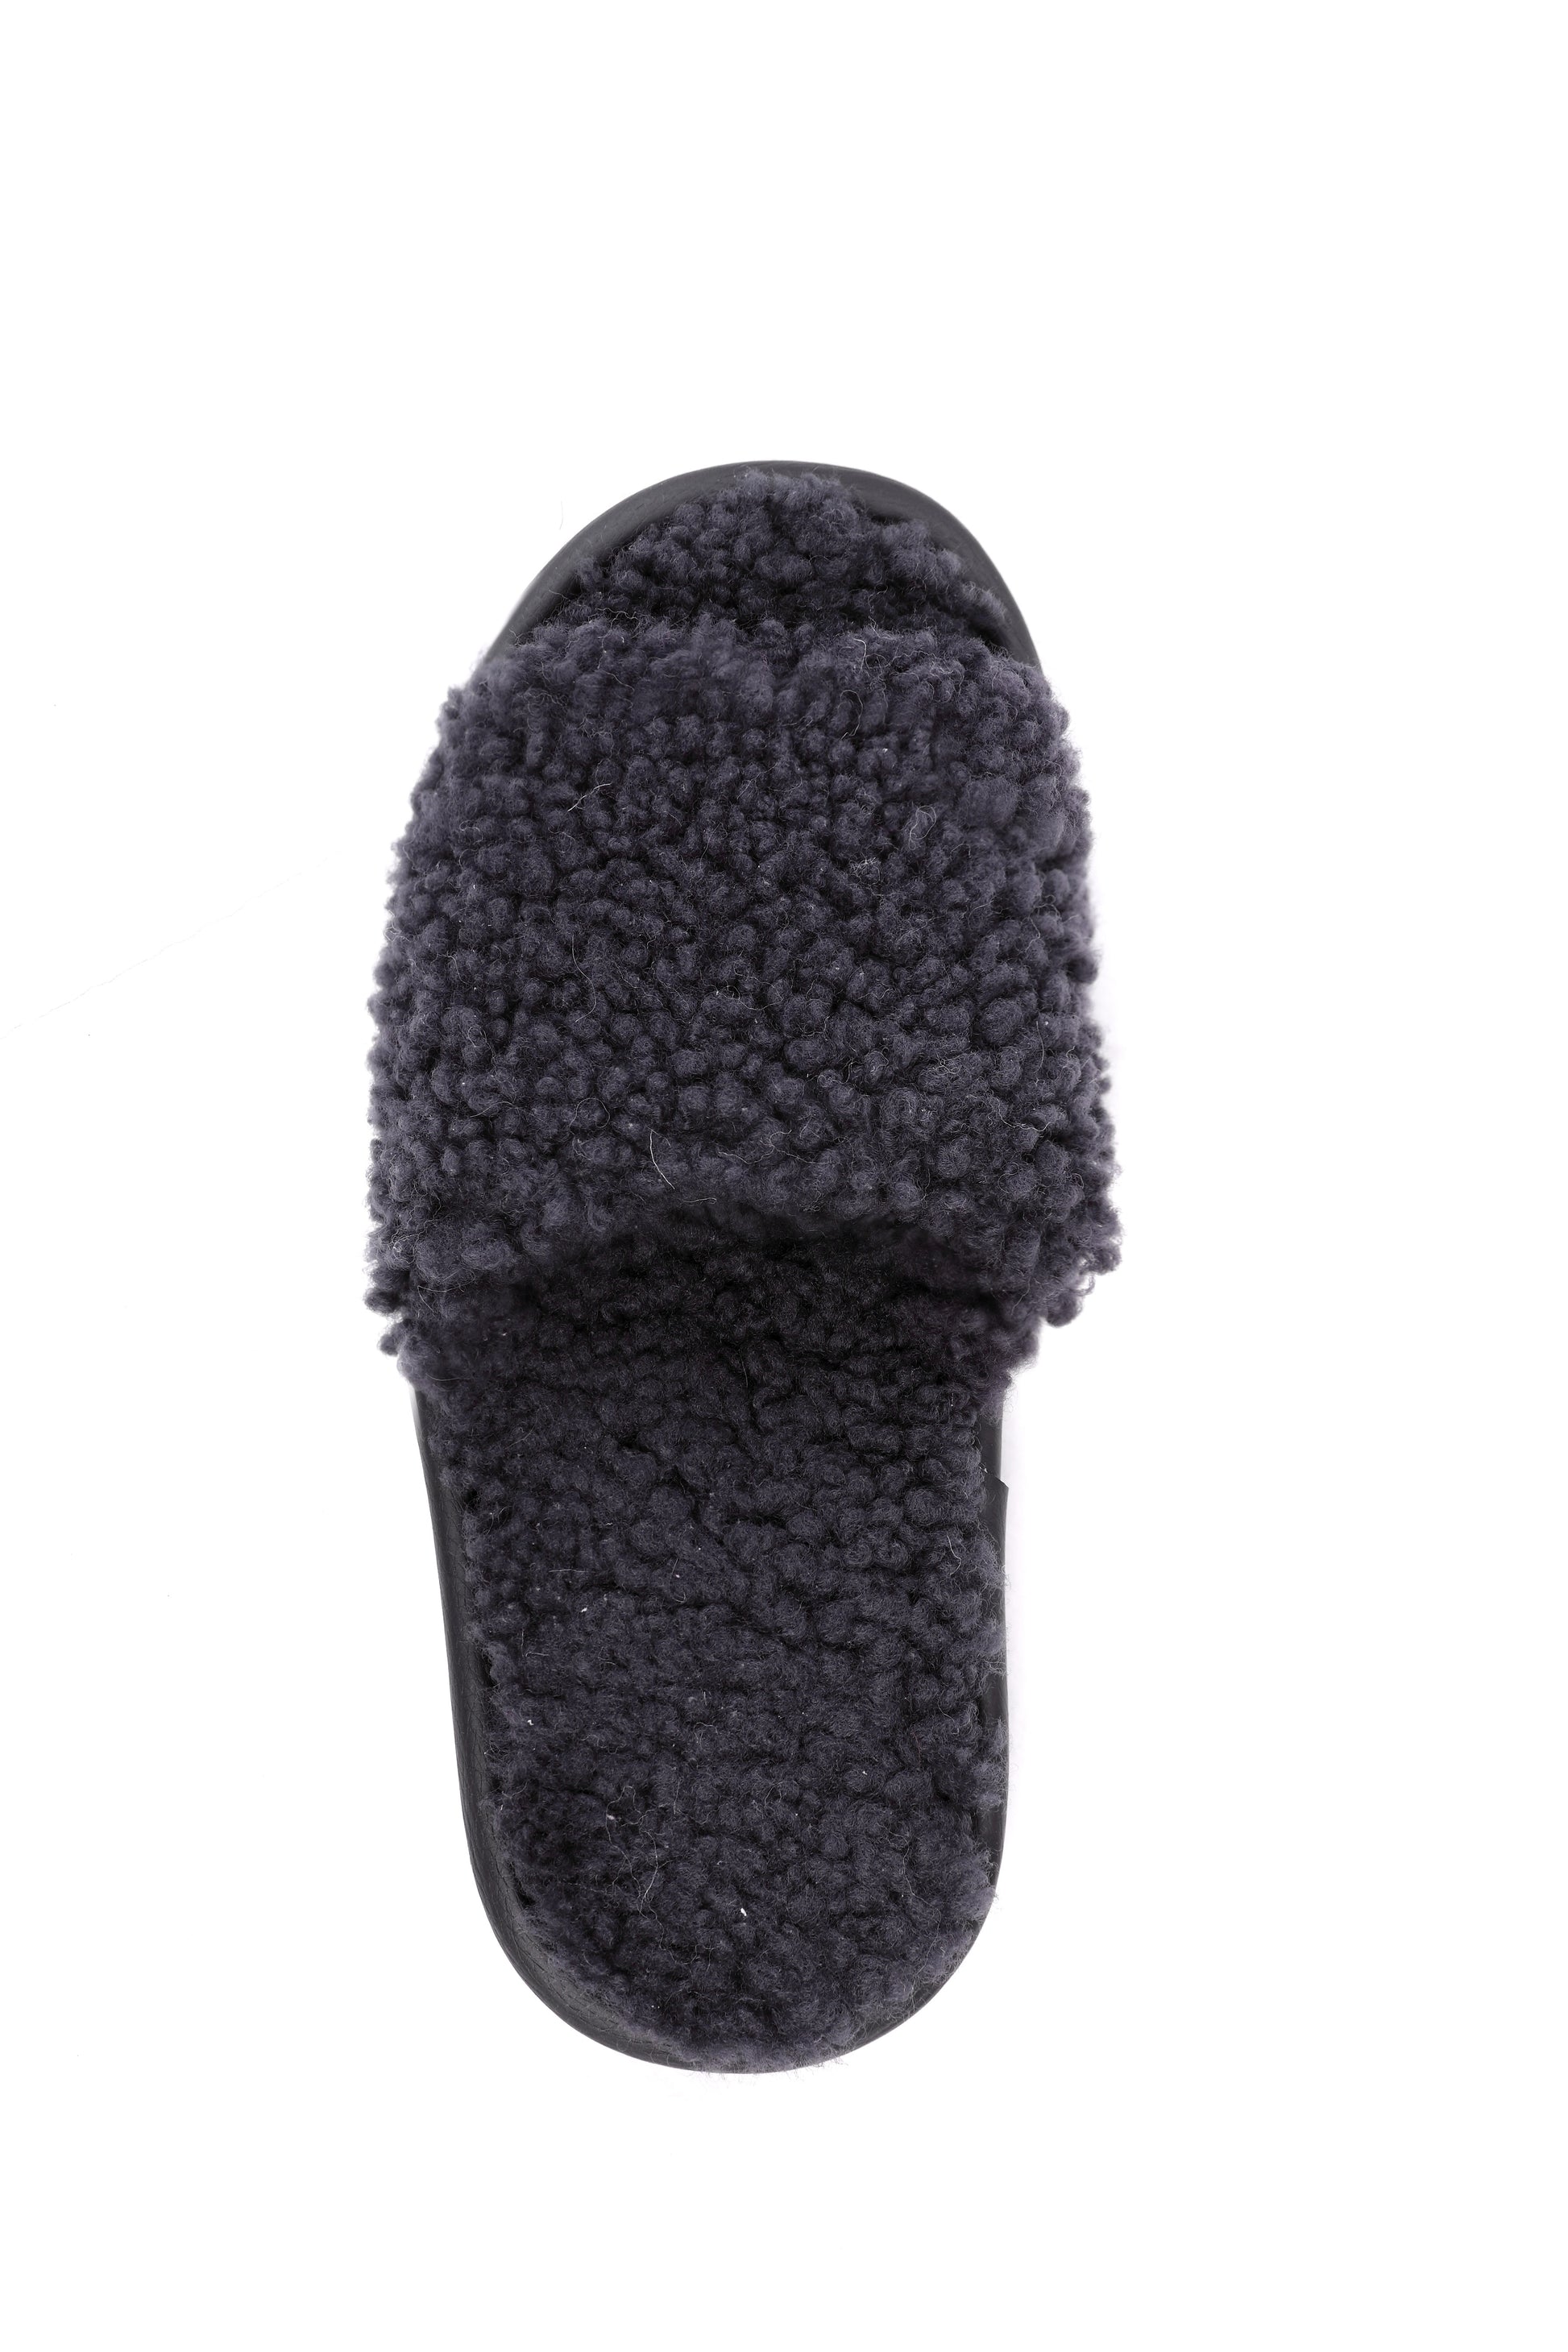 Unisex Open Toe Soft Sheepskin Slippers with Fur Lining in Aubergine Color